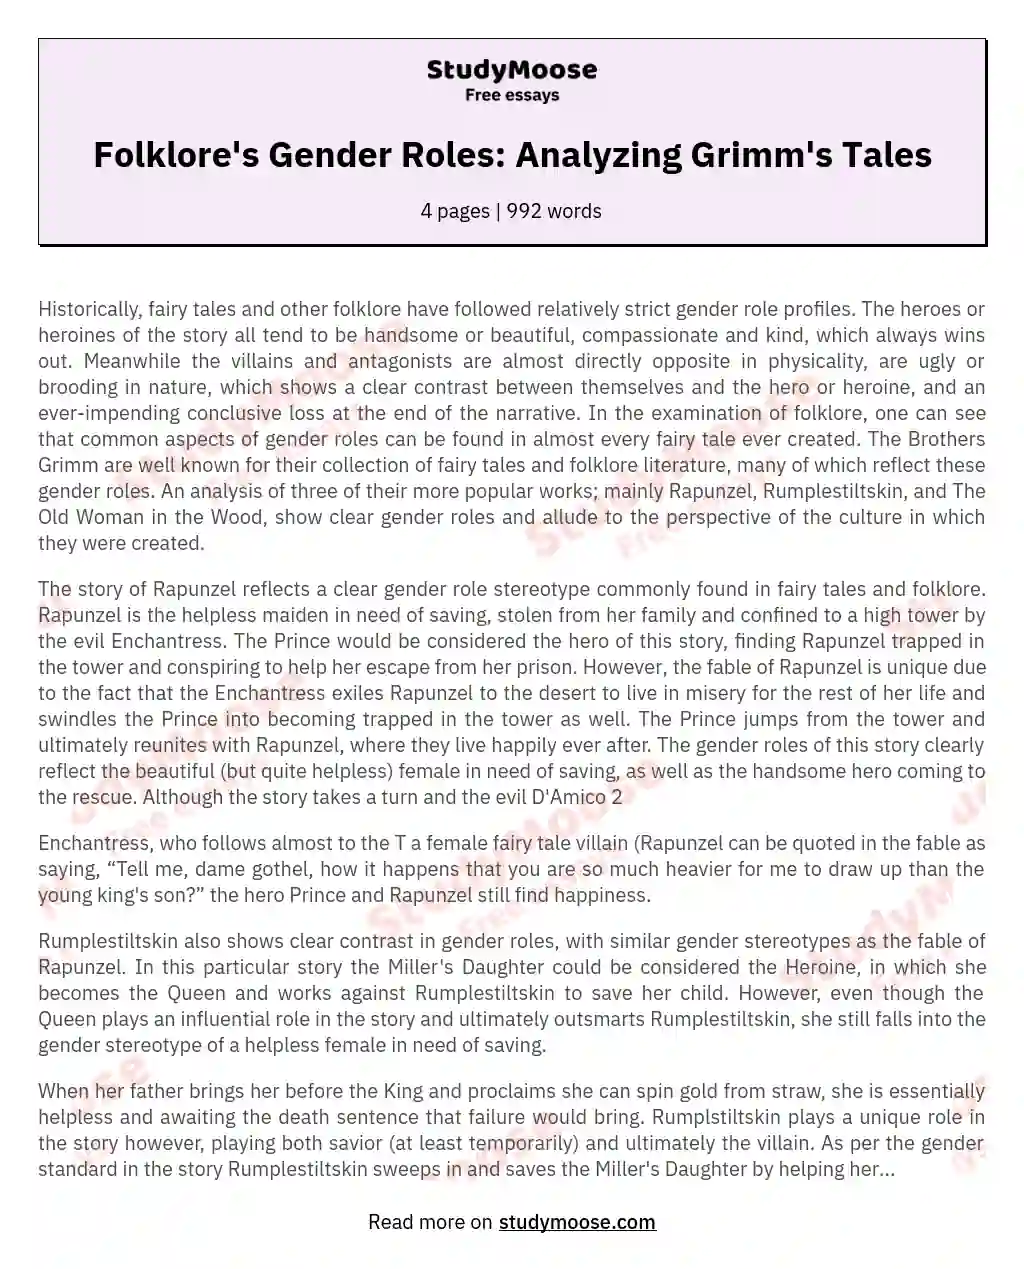 Folklore's Gender Roles: Analyzing Grimm's Tales essay